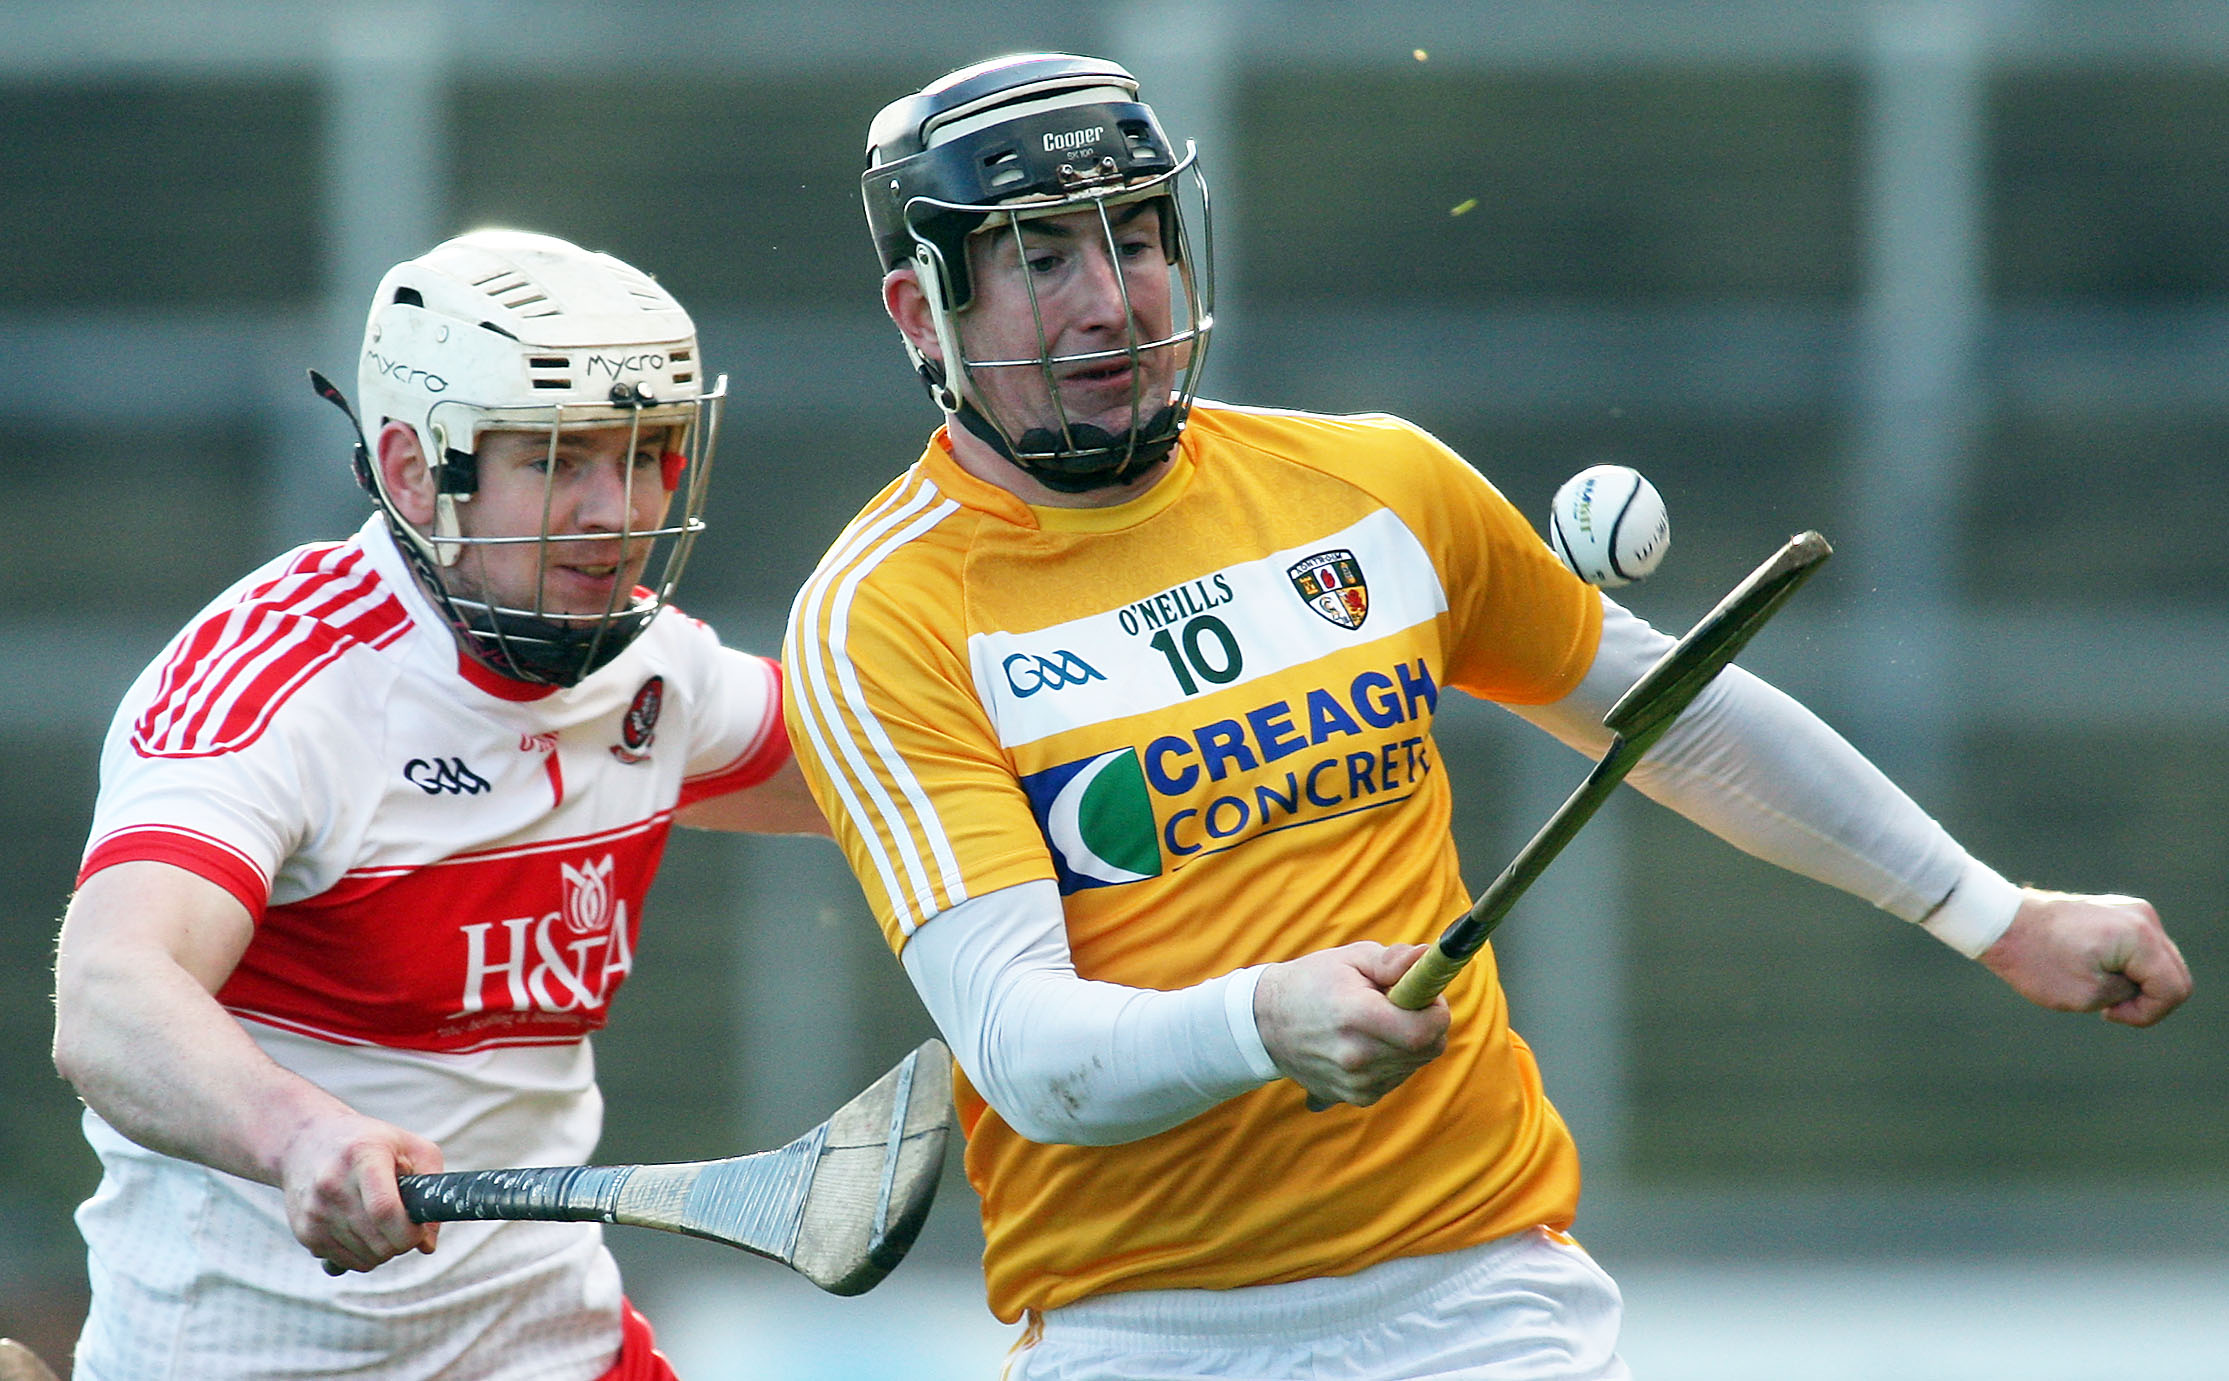 Antrim and Meath return to Croke Park on Saturday for the Christy Ring Cup final replay